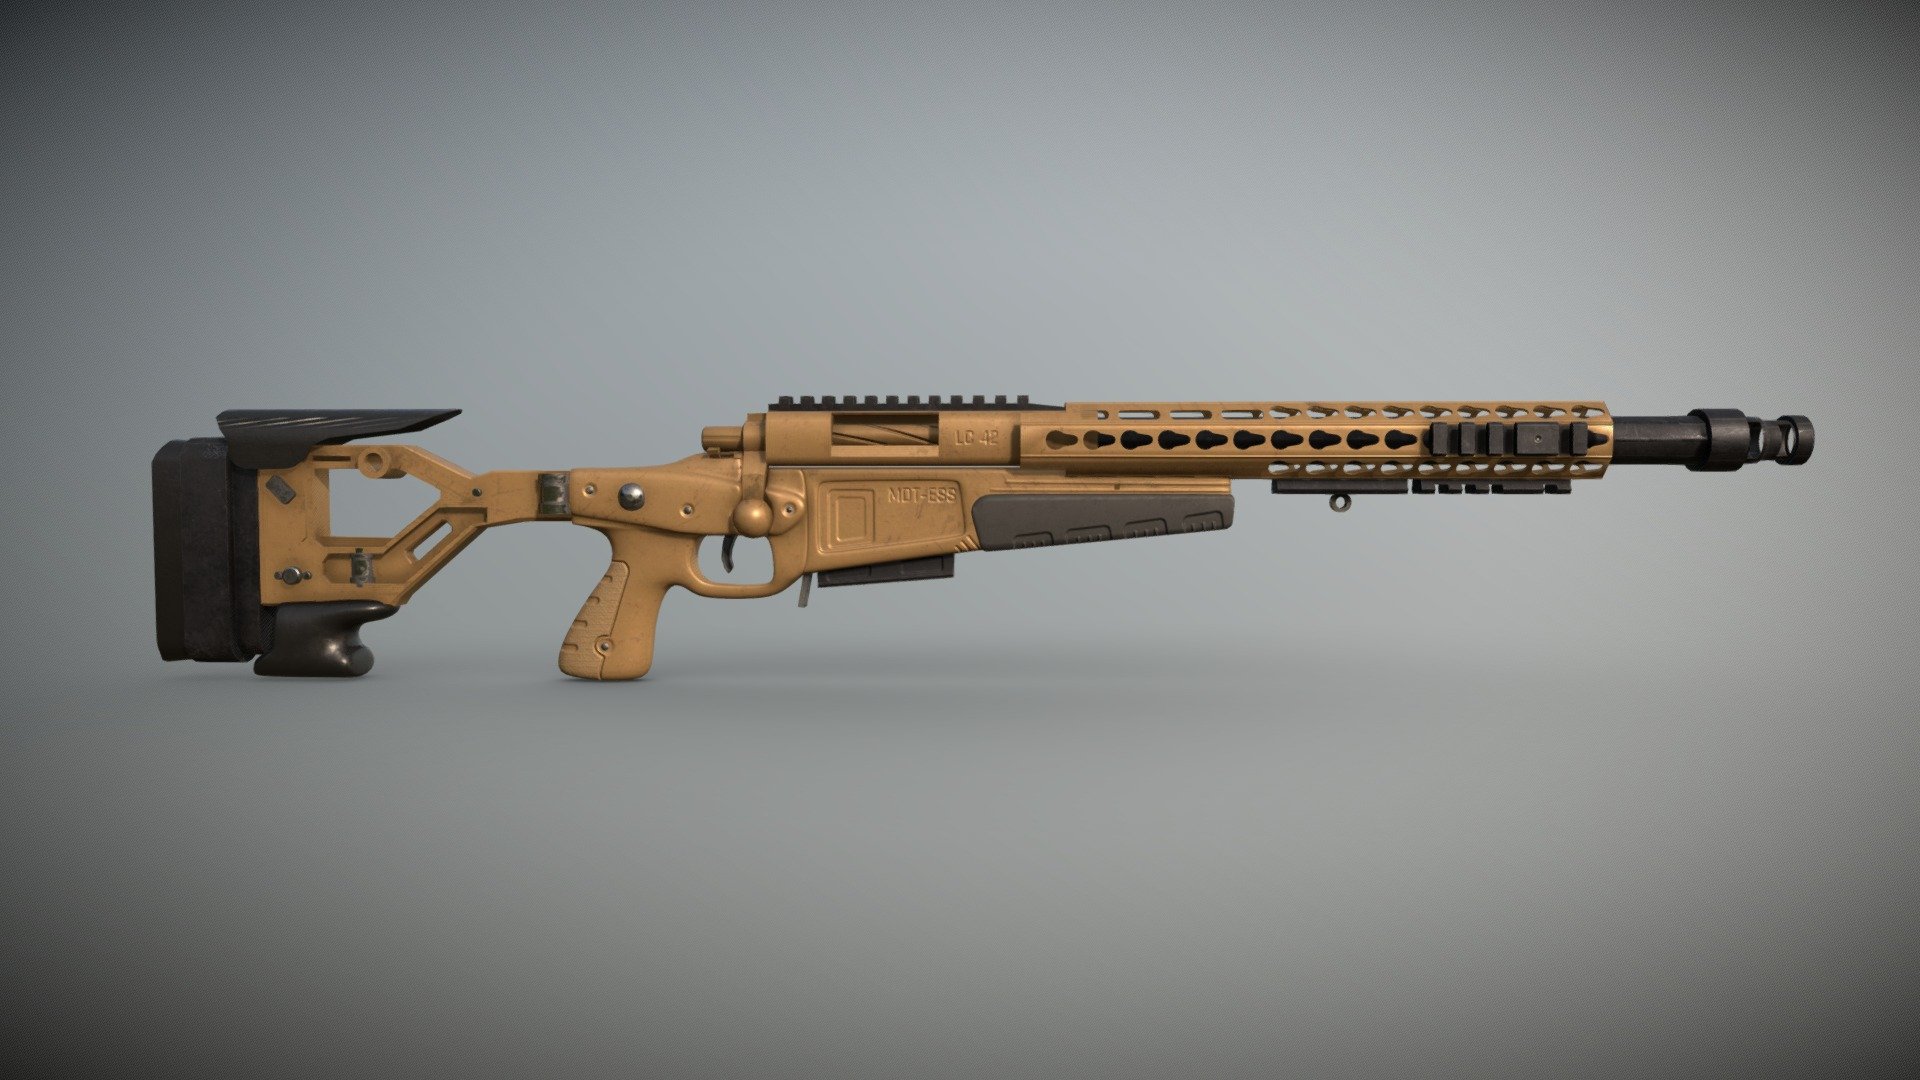 3D low-poly model of LC 42 Rifle

Where is your scope, dude? :D

PBR texture set + AO, made with one single material.

Rigged parts: root bone, trigger, shutter, ammunition - LC 42 Rifle - Buy Royalty Free 3D model by Incg5764 3d model